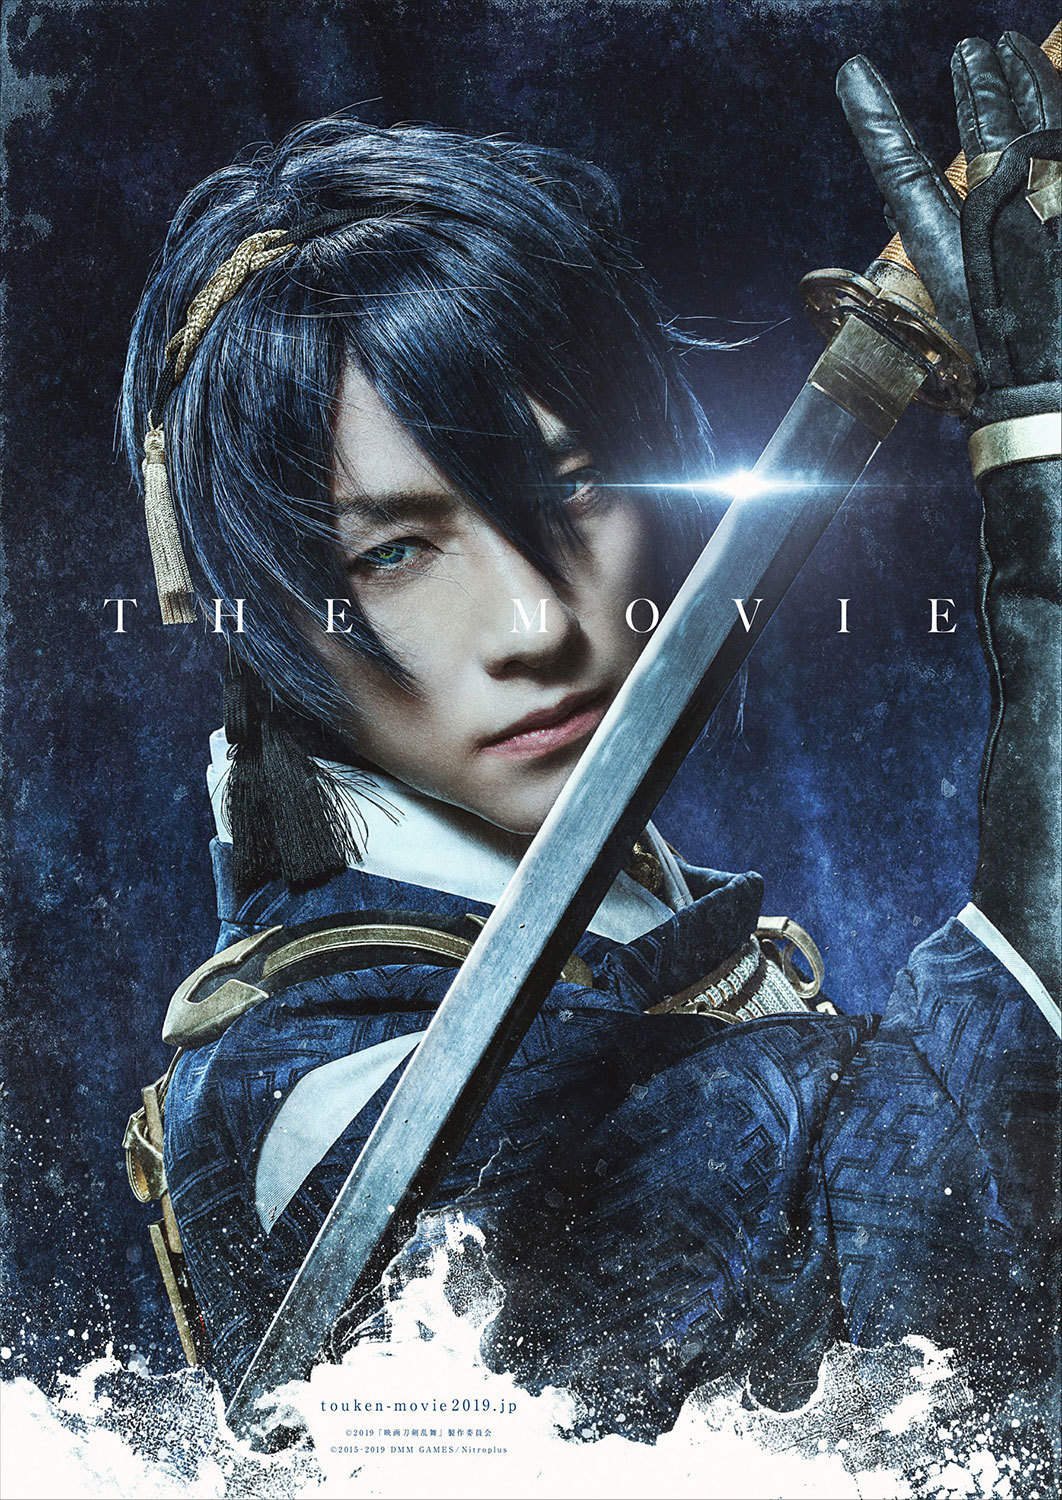 The first visual for the âTouken Ranbuâ live-action movie shows Mikazuki Munechika played by Hiroki Suzuki. The film will be released in 2019.